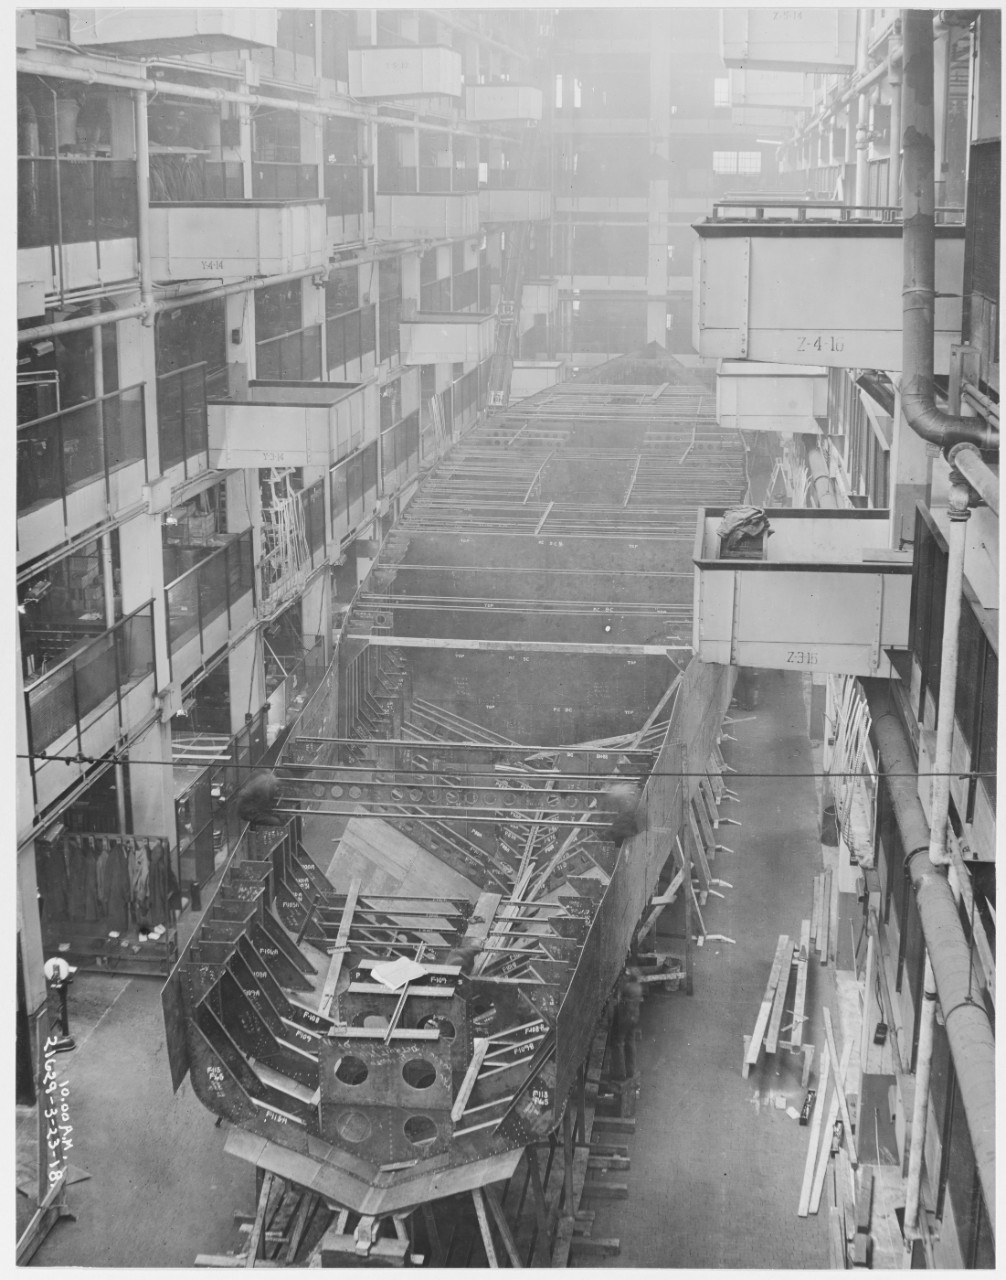 Construction of Ford Eagle Boats, Ford Motor Company, March 23, 1918